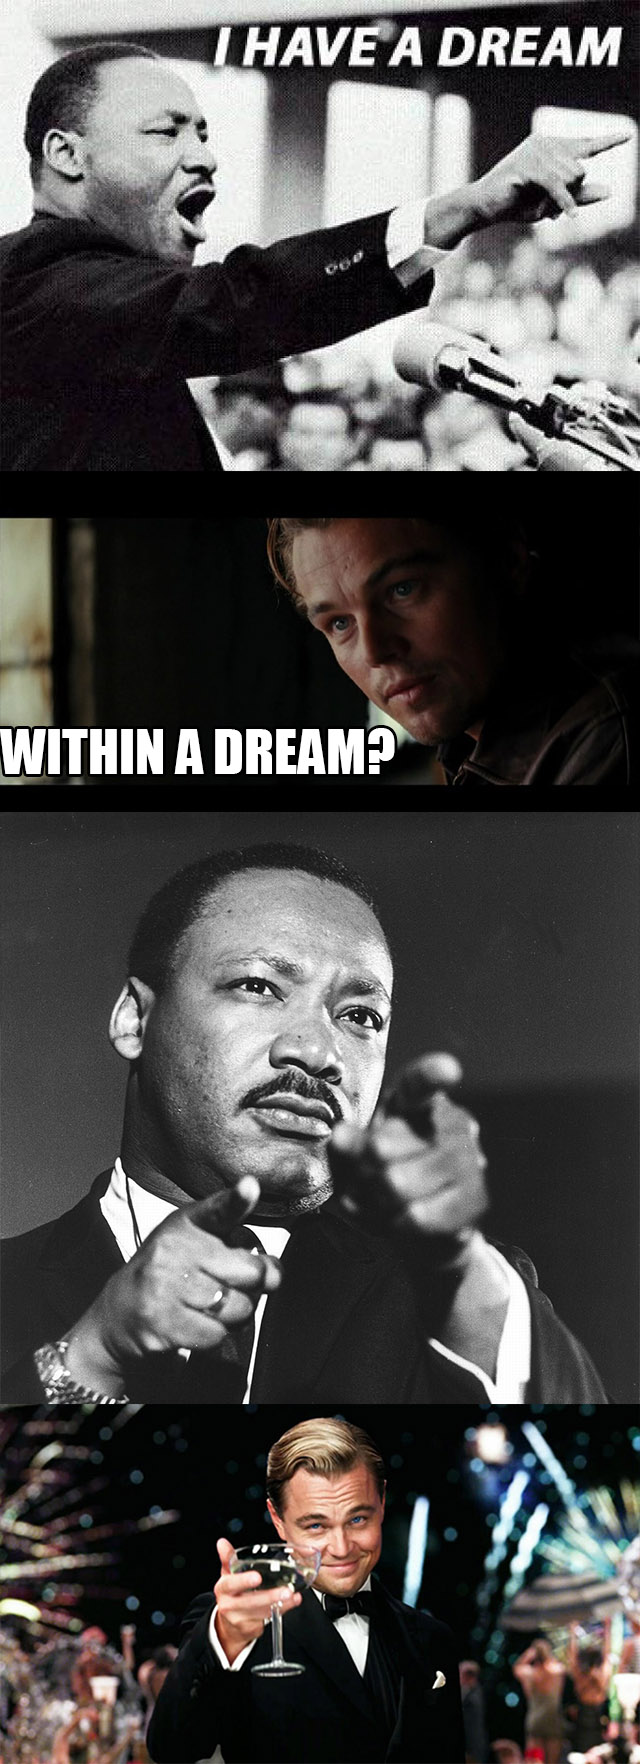 film - I Have A Dream Within A Dream?